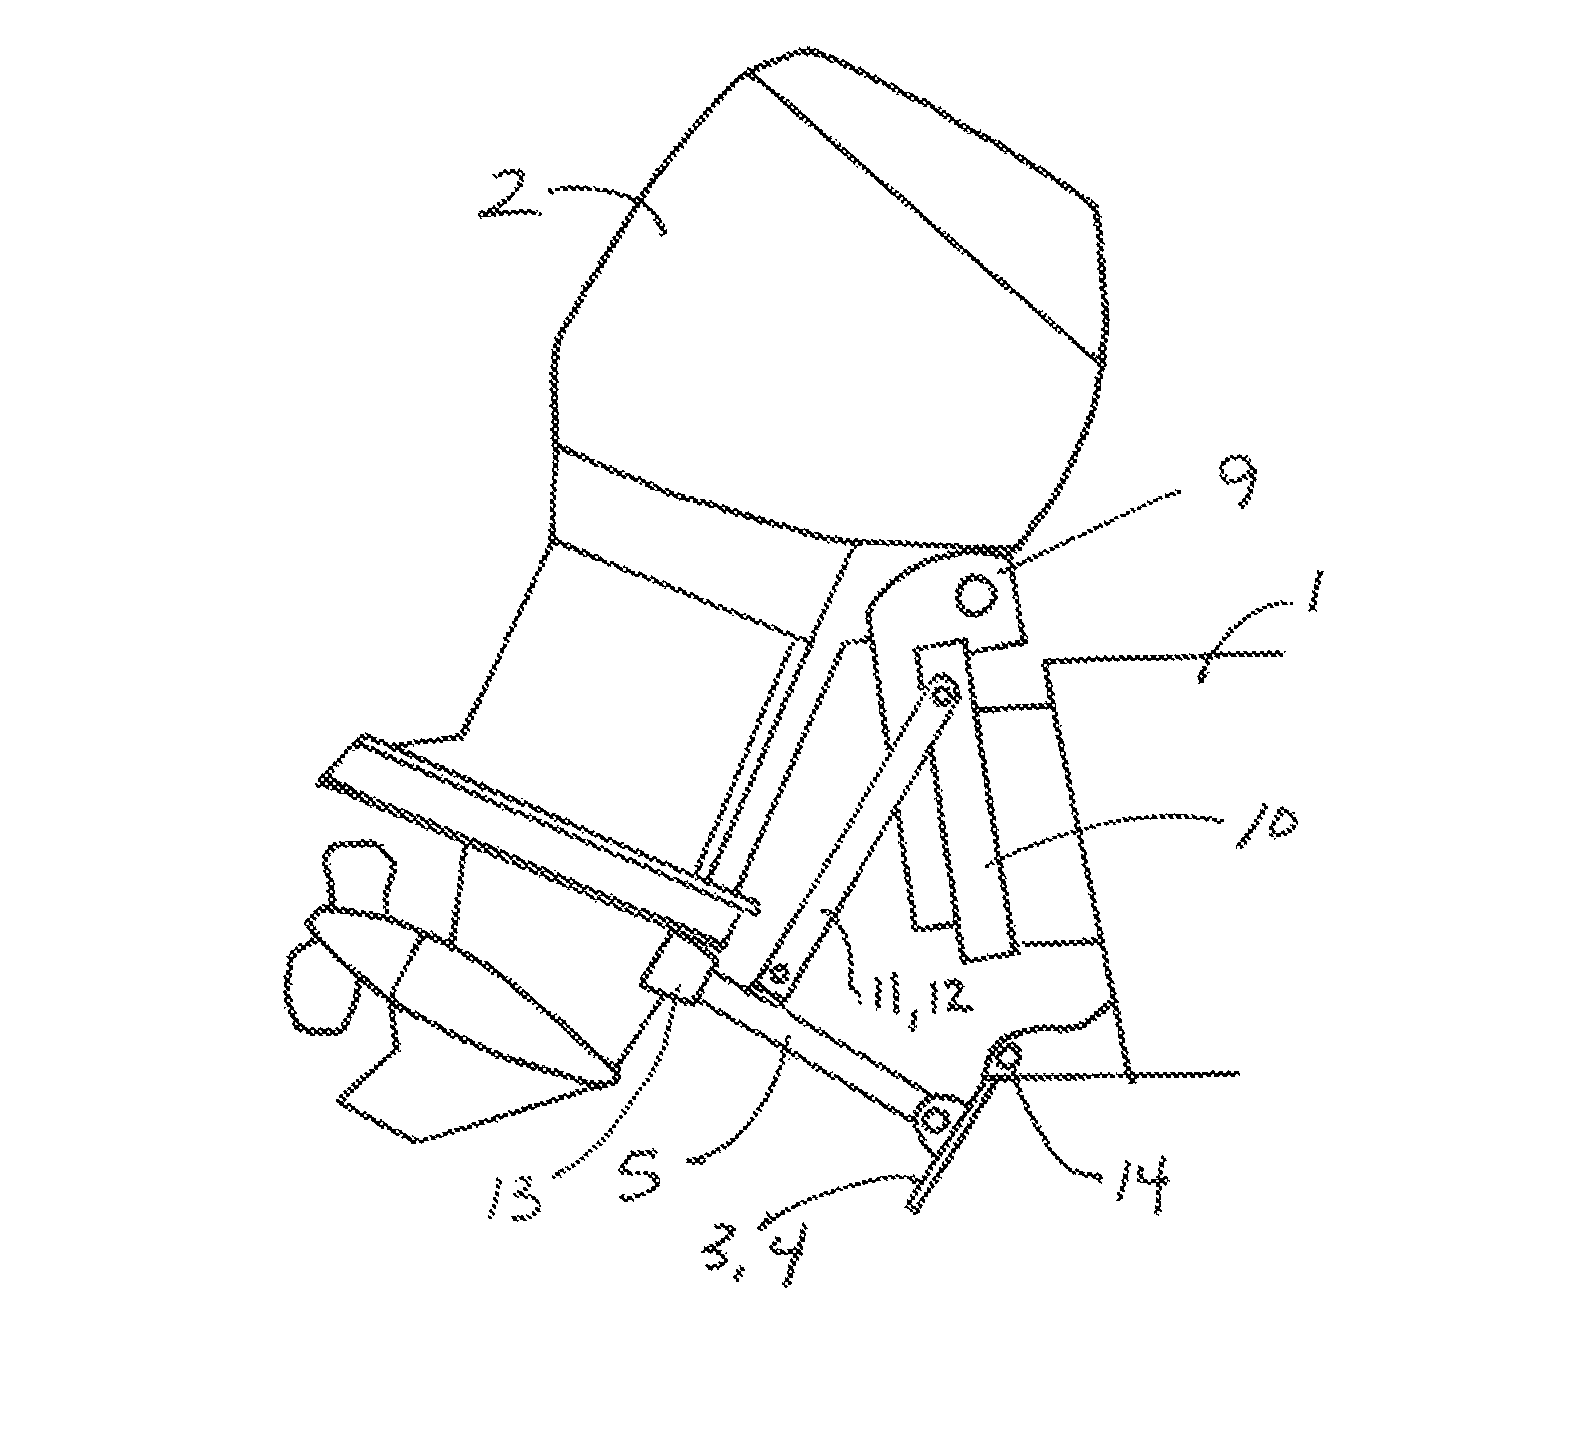 Boat drive-supported wake generating device